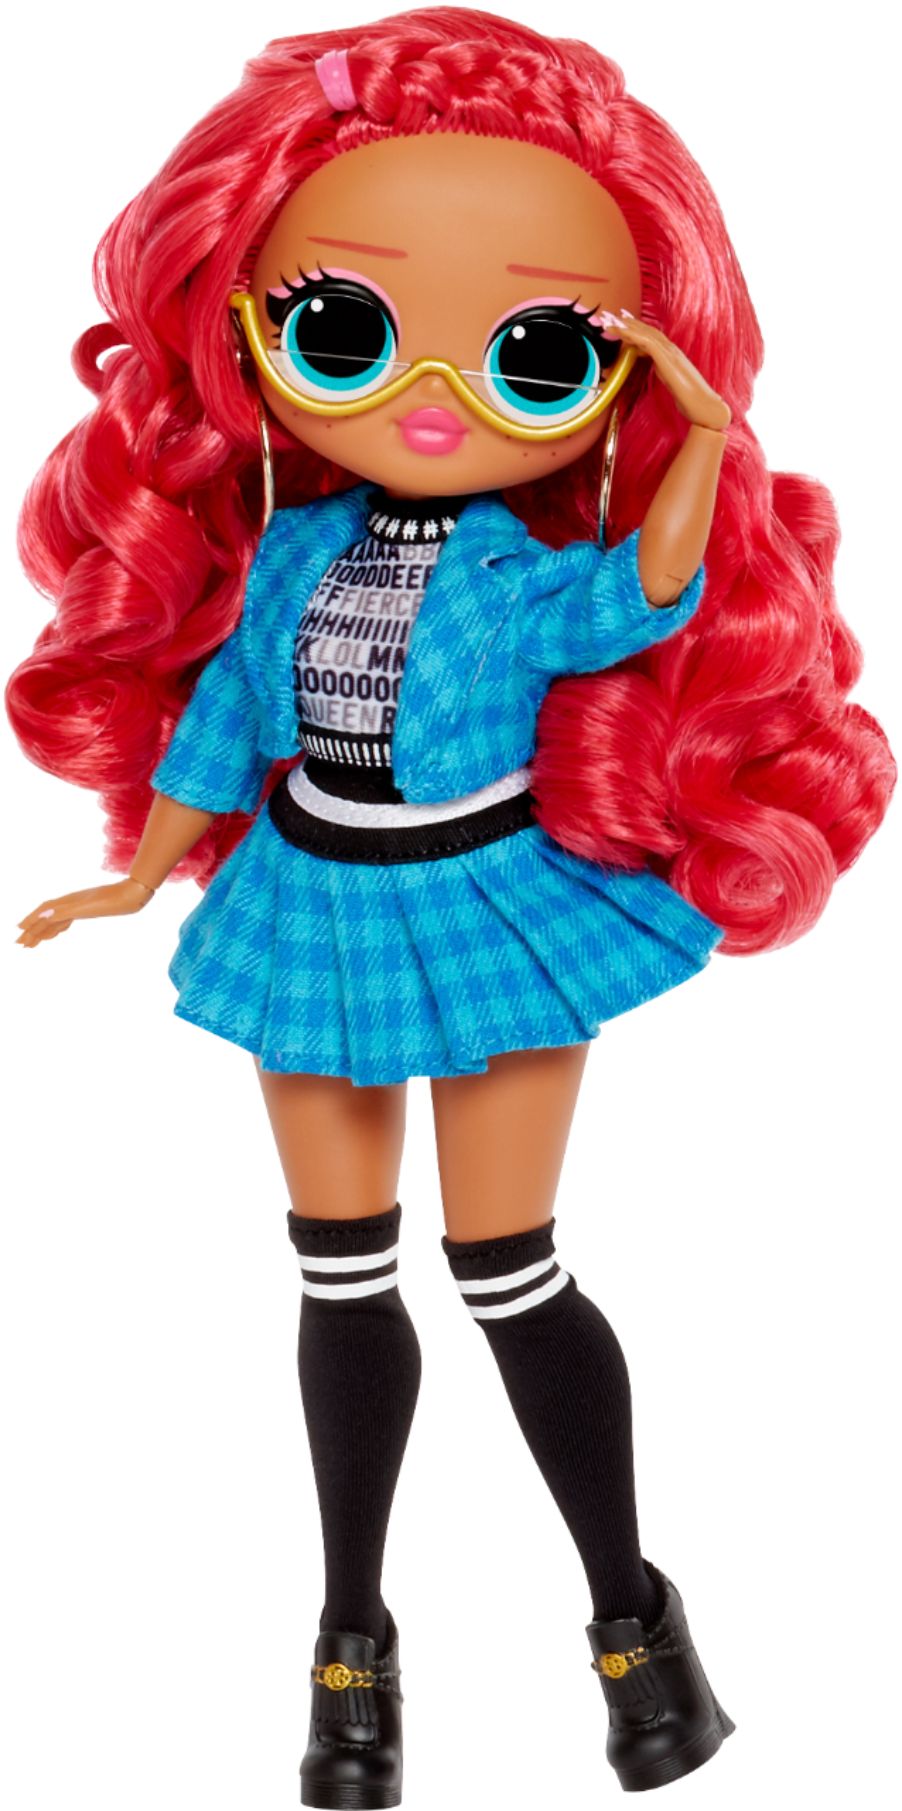 MGA Entertainment LOL SURPRISE OMG DOLL- CLASS PREZ 567202 - Best Buy